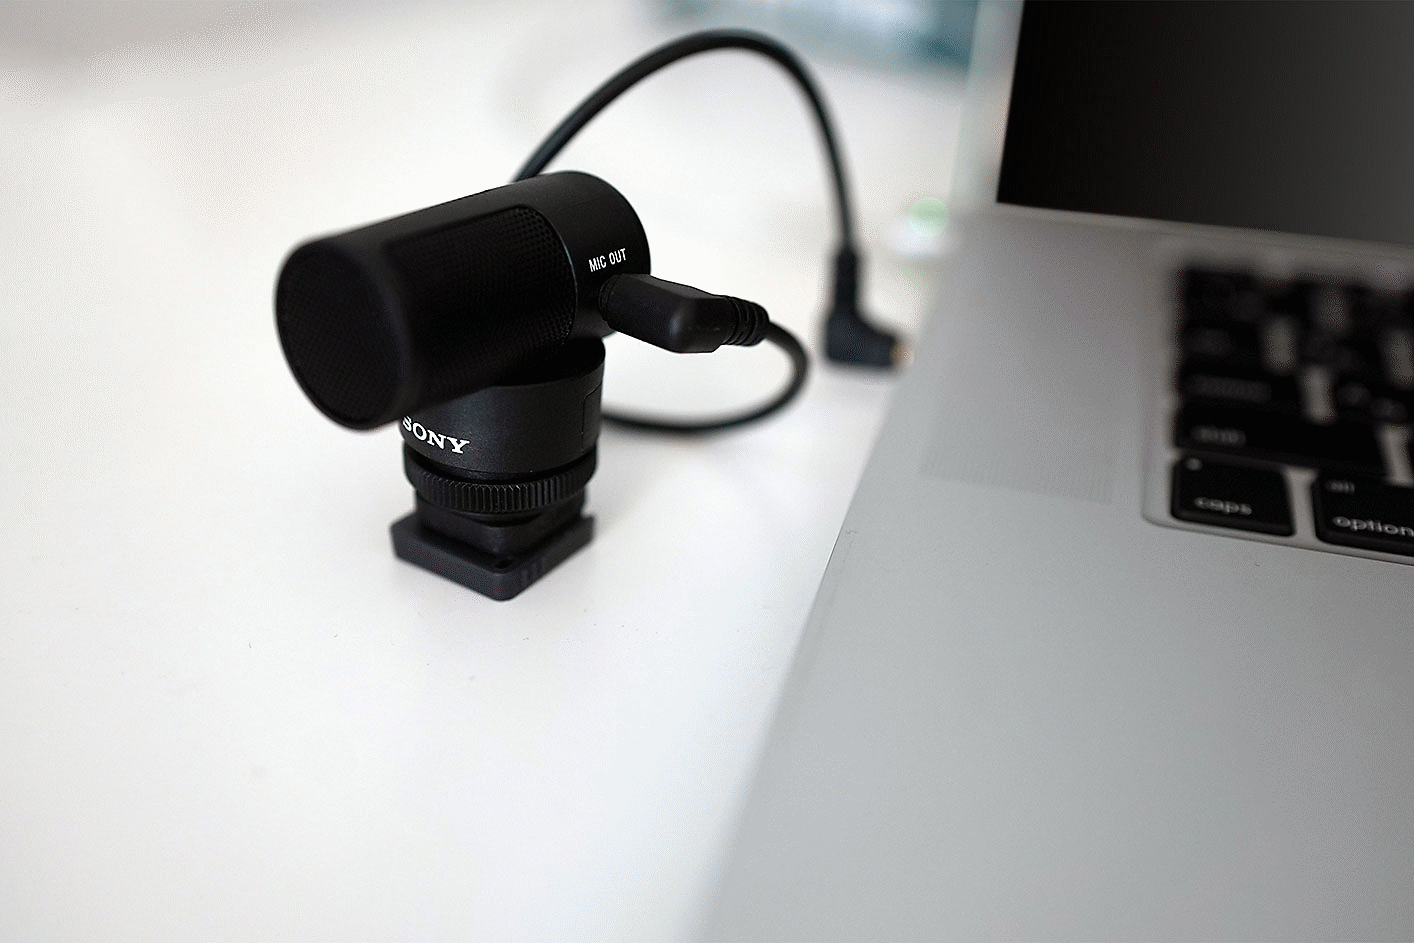 Photo of ECM-G1 connected to a smartphone using a 3.5mm output jack and adapter.